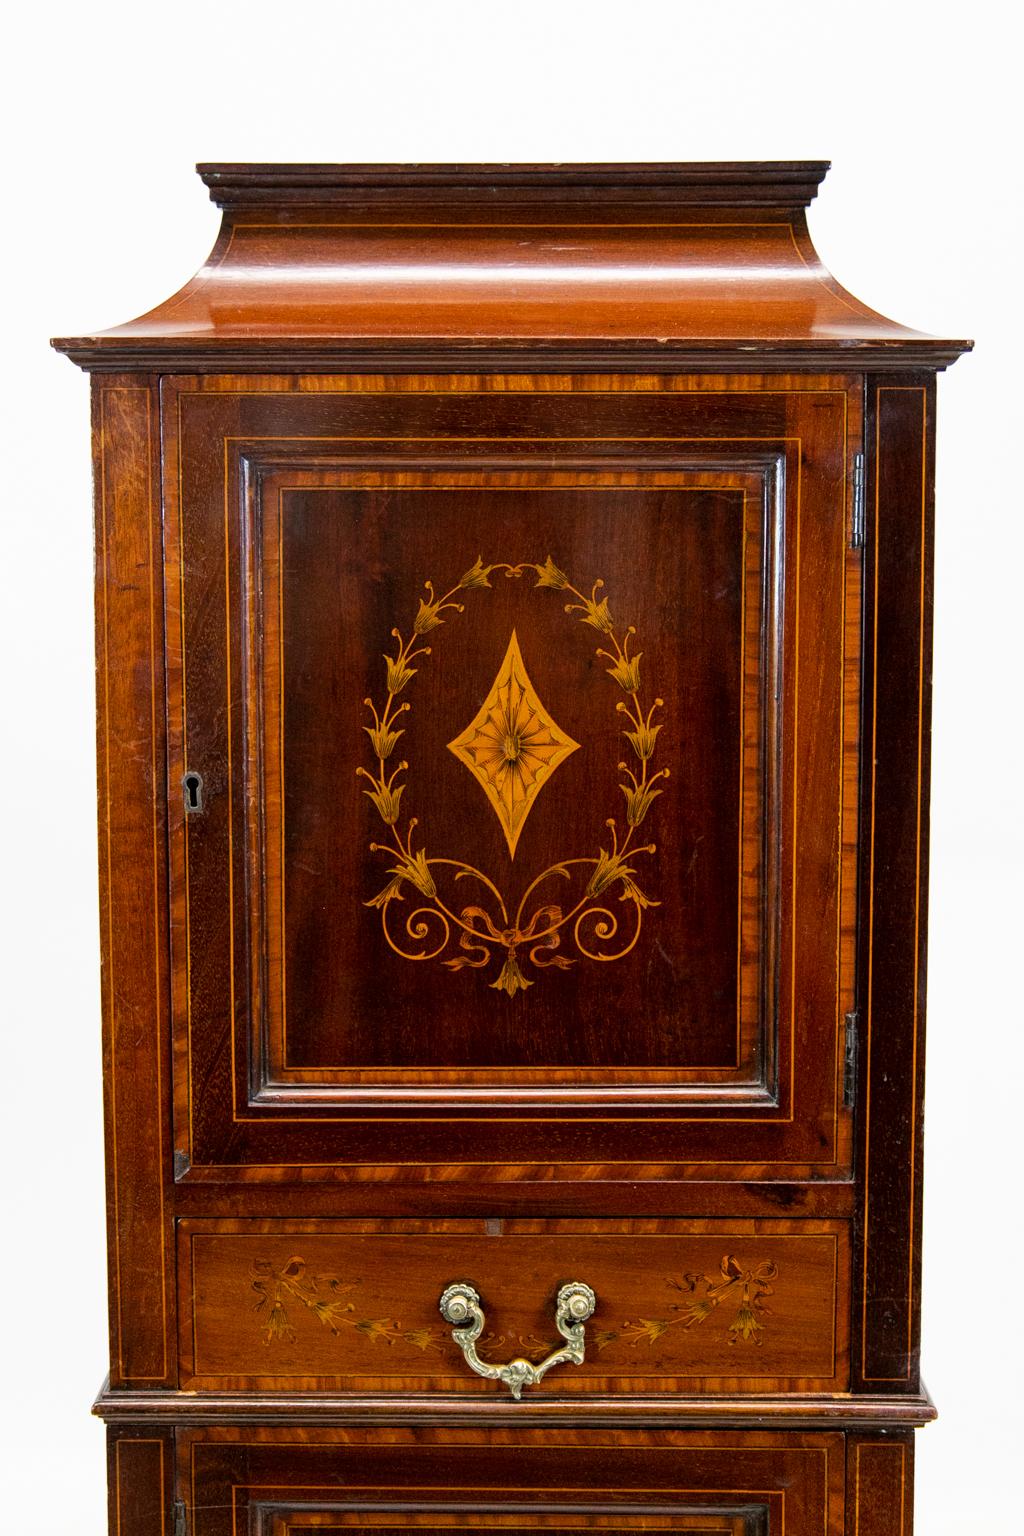 Small inlaid Mahogany Cabinet, is inlaid with boxwood and ebony stringing and bandings of bees wing satinwood. The center of the doors are inlaid with stylized bellflower wreaths in diamond shaped fans. The secondary wood is solid mahogany. The